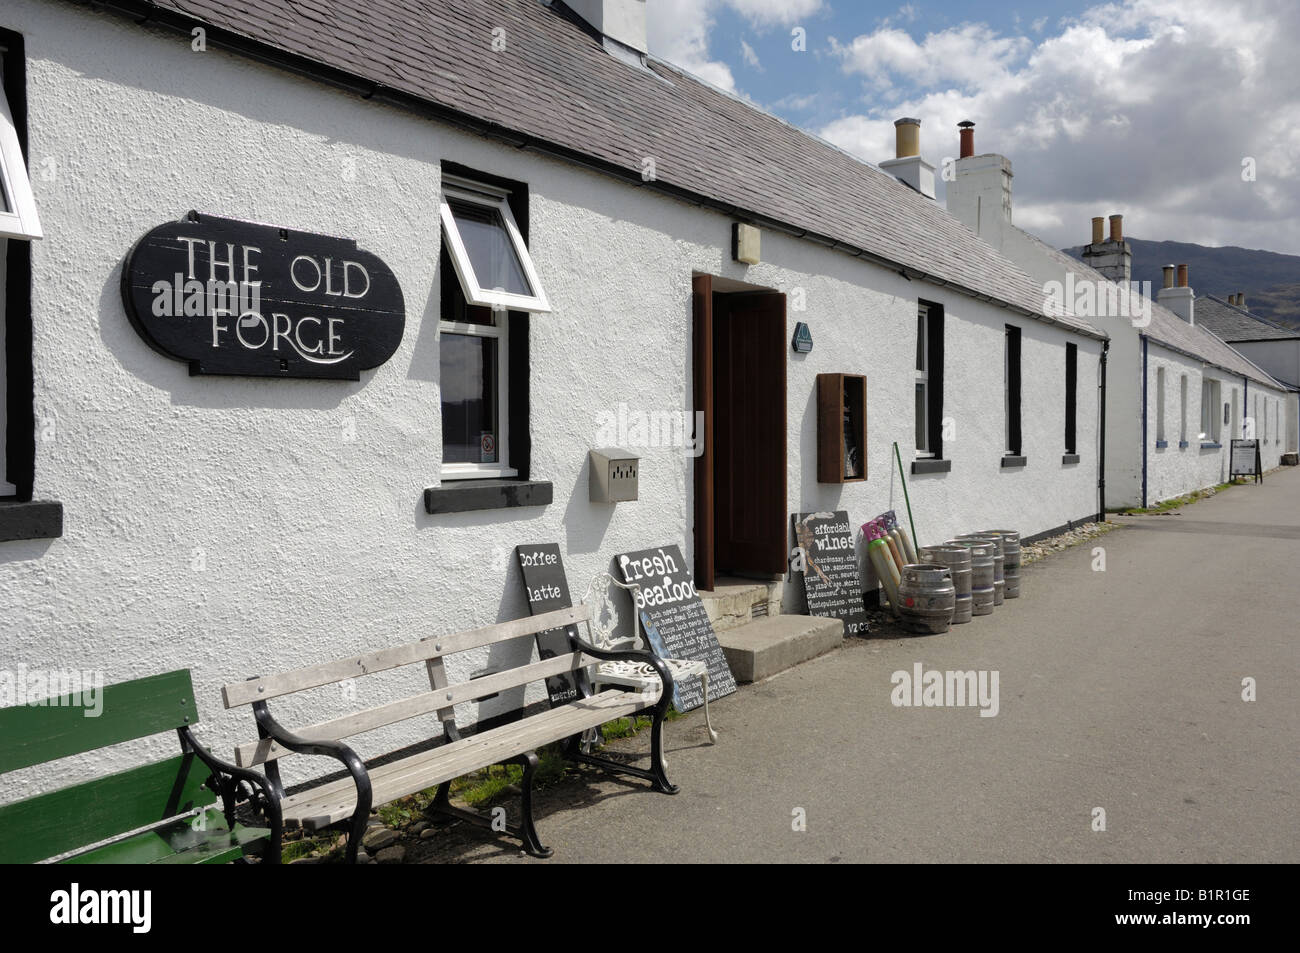 The Old Forge, Britains remotest pub, Inverie, Knoydart, Highlands, Scotland Stock Photo